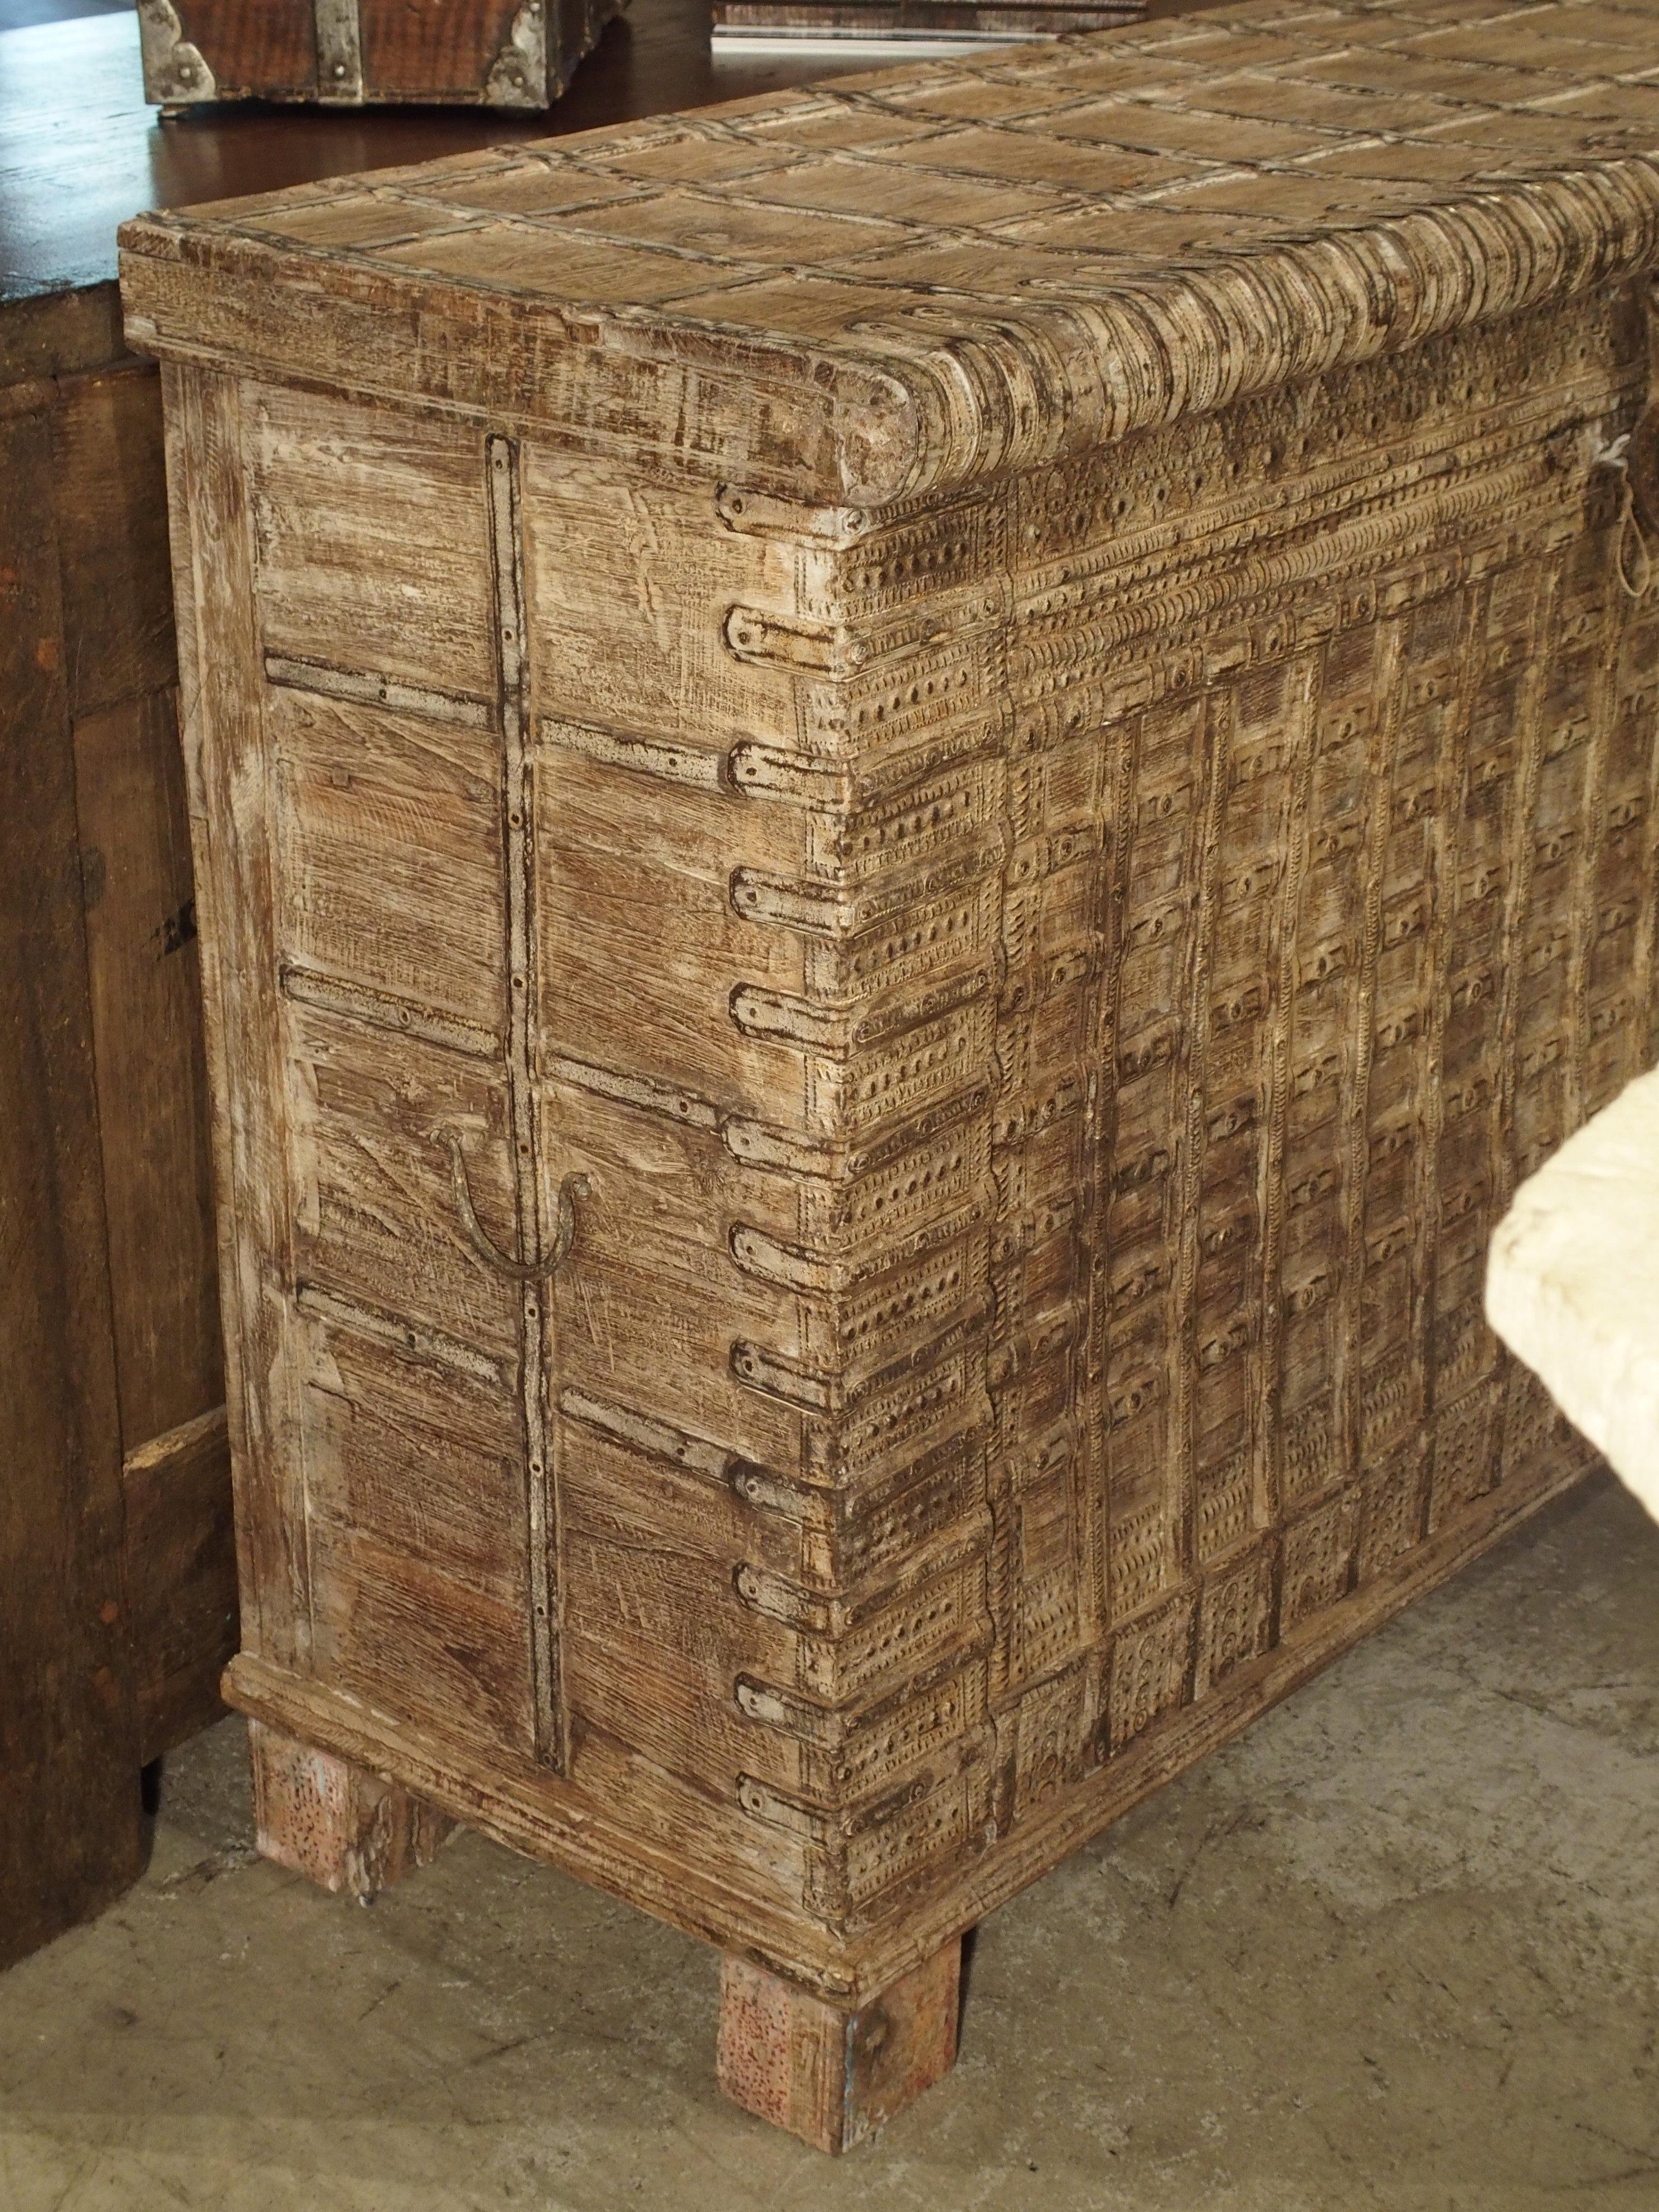 Contemporary Large Whitewashed Trunk from India Composed of Antique Elements